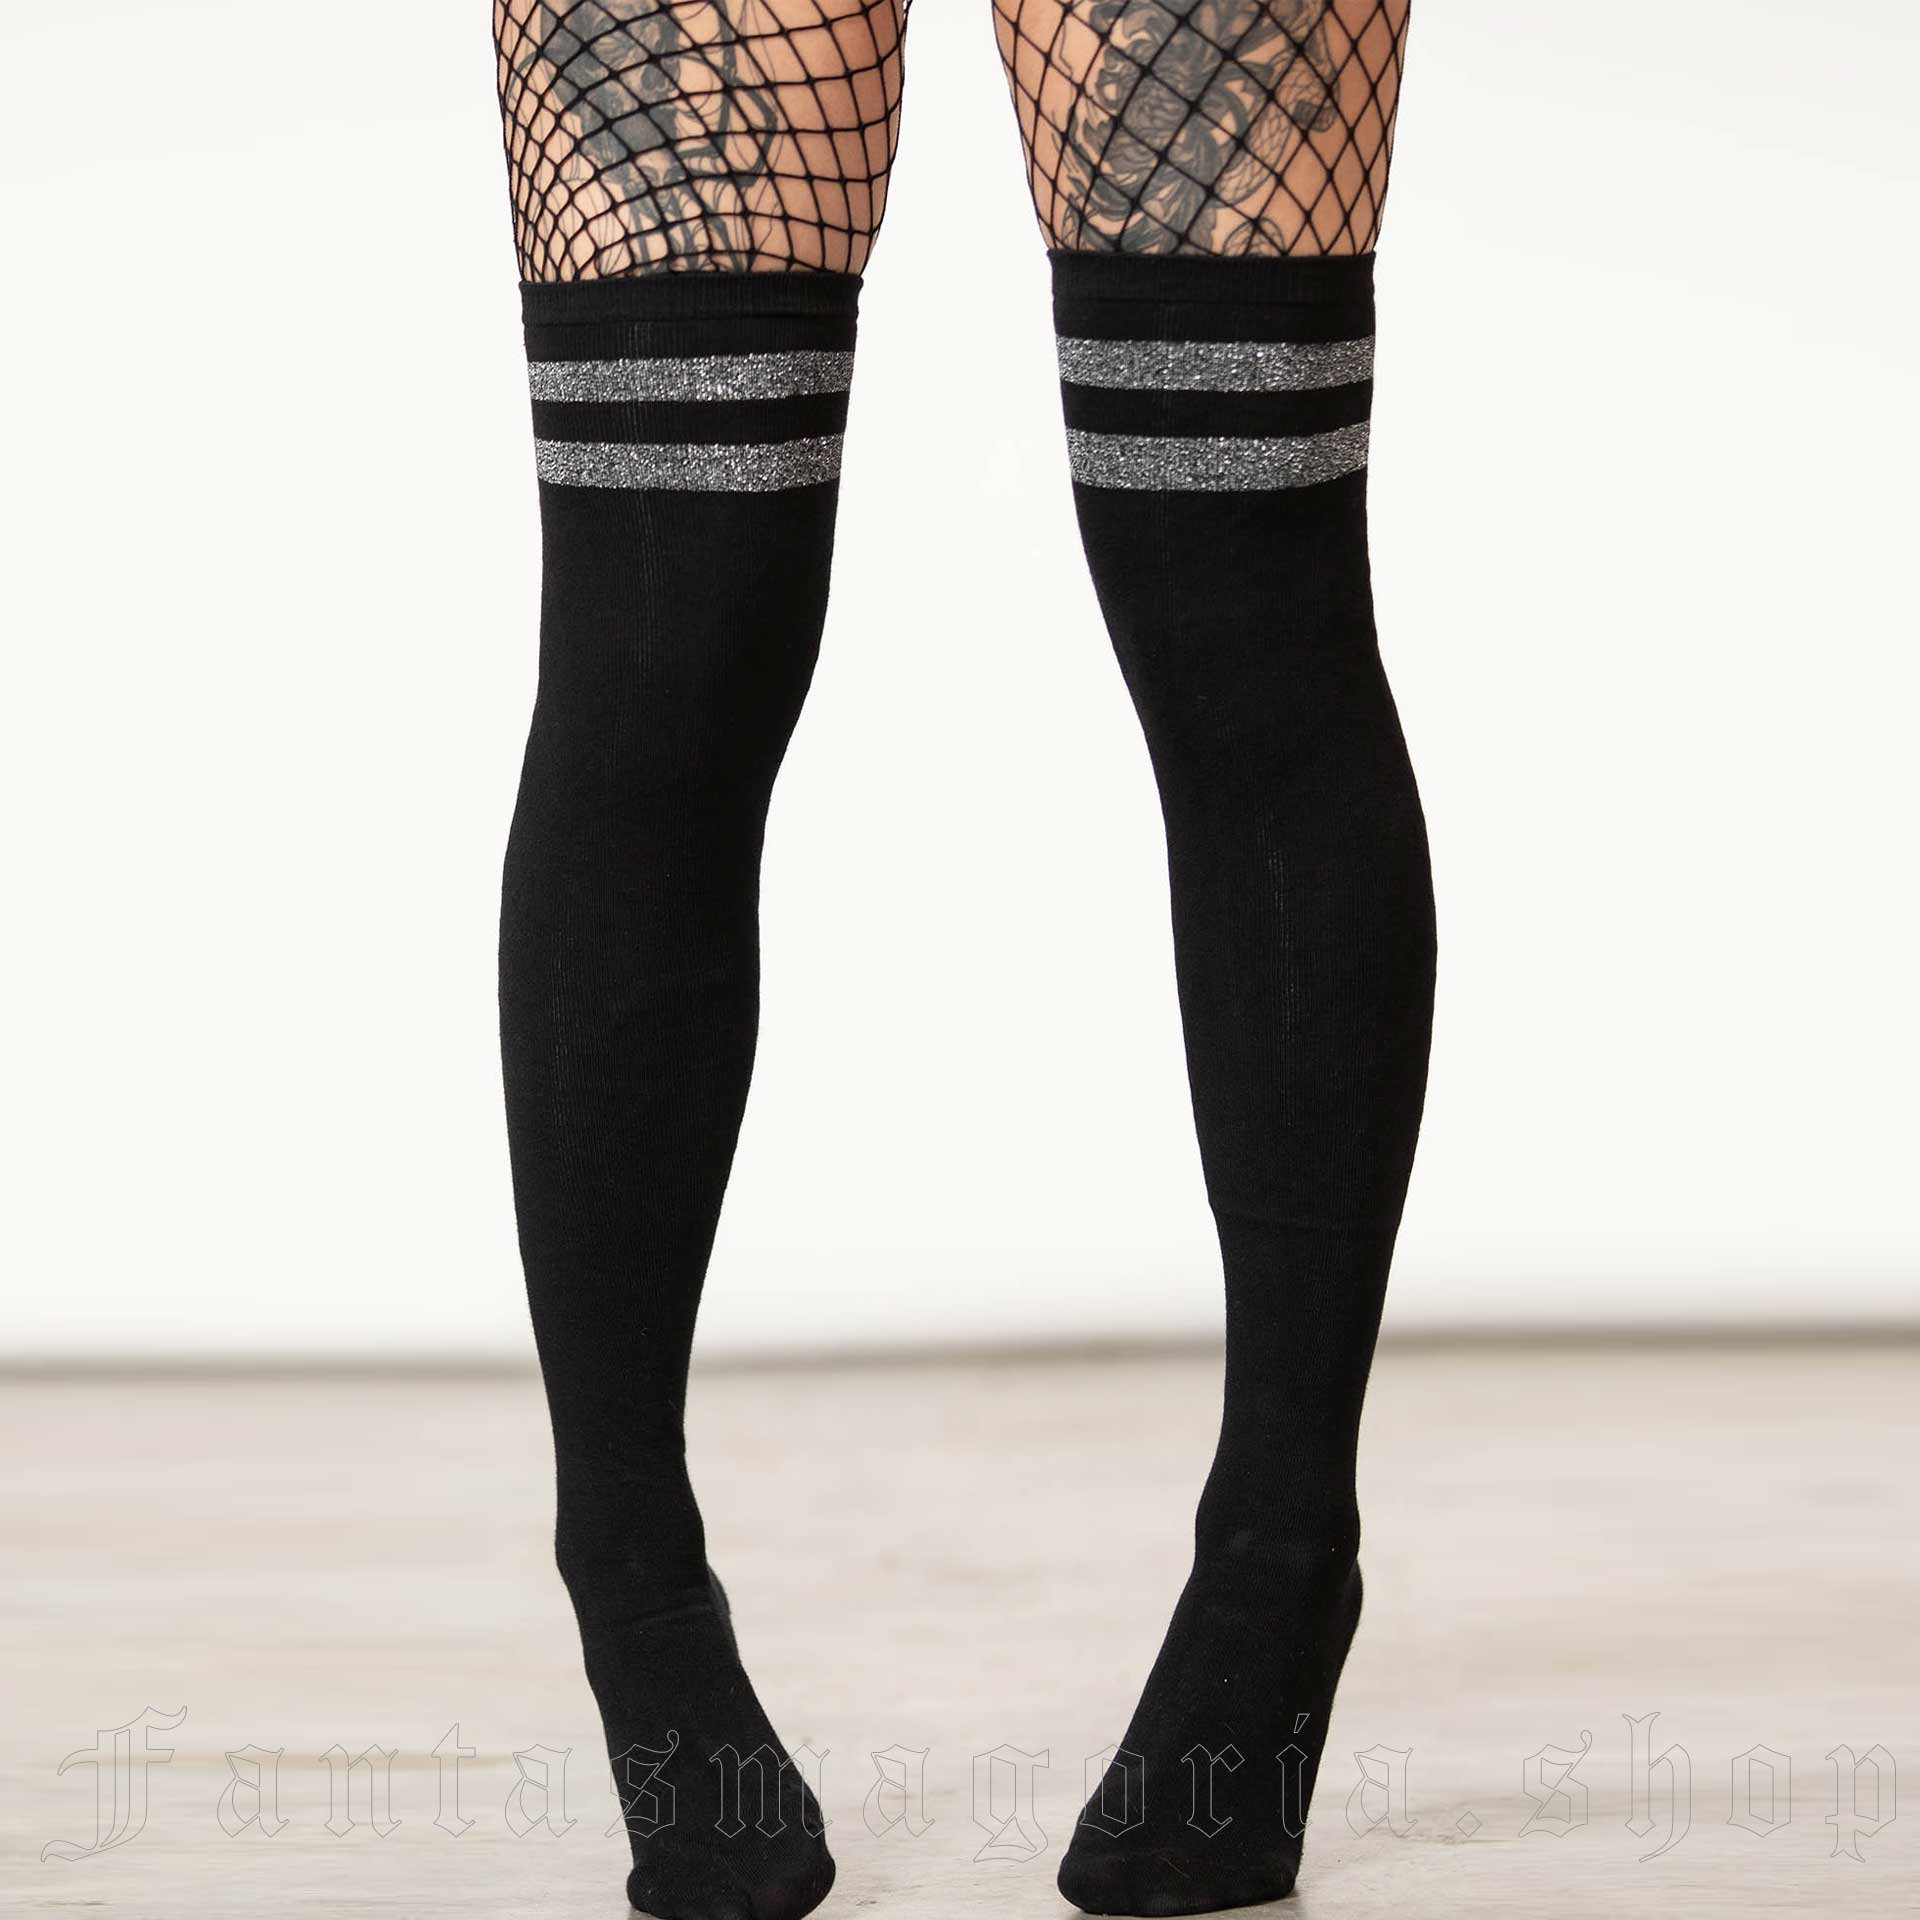 Black over the knee sock with a double silver gray stripes